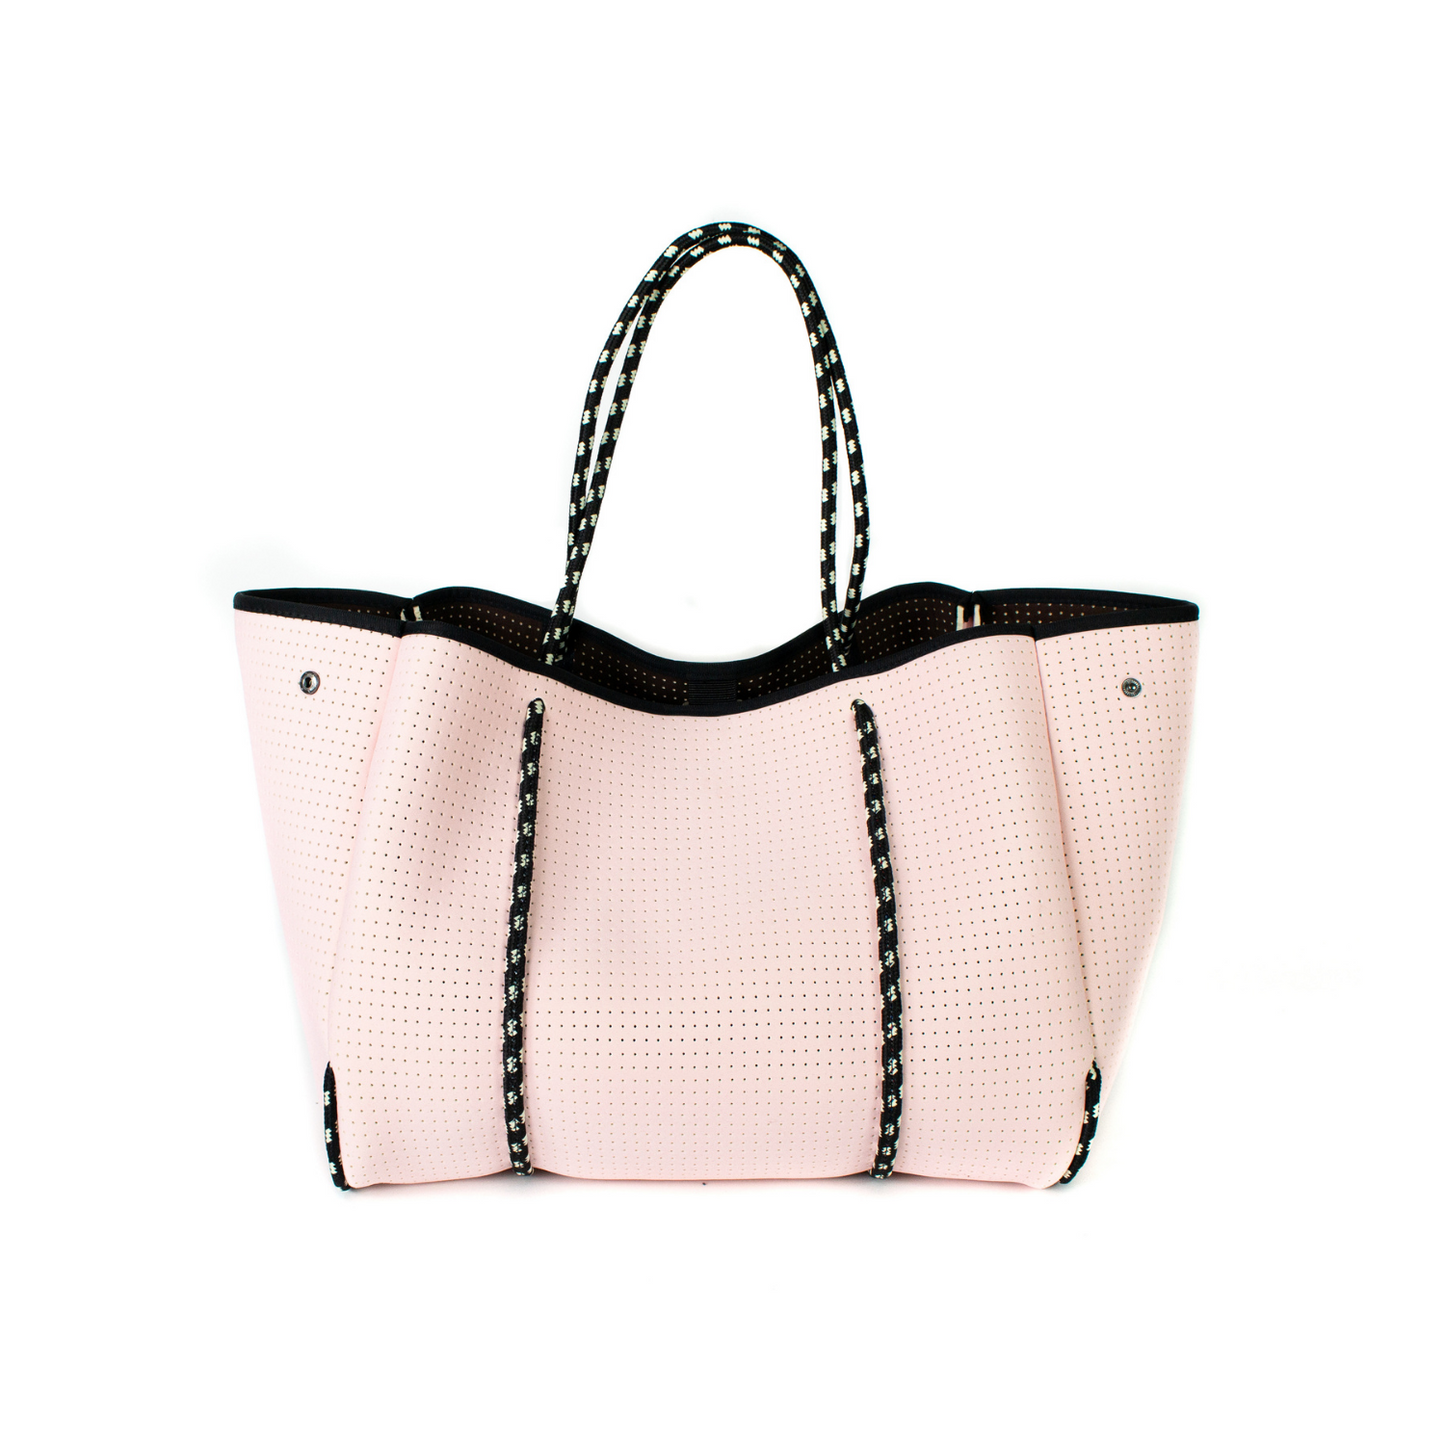 FLAP CROSSBODY + EVERYDAY TOTE - PRETTY IN PINK